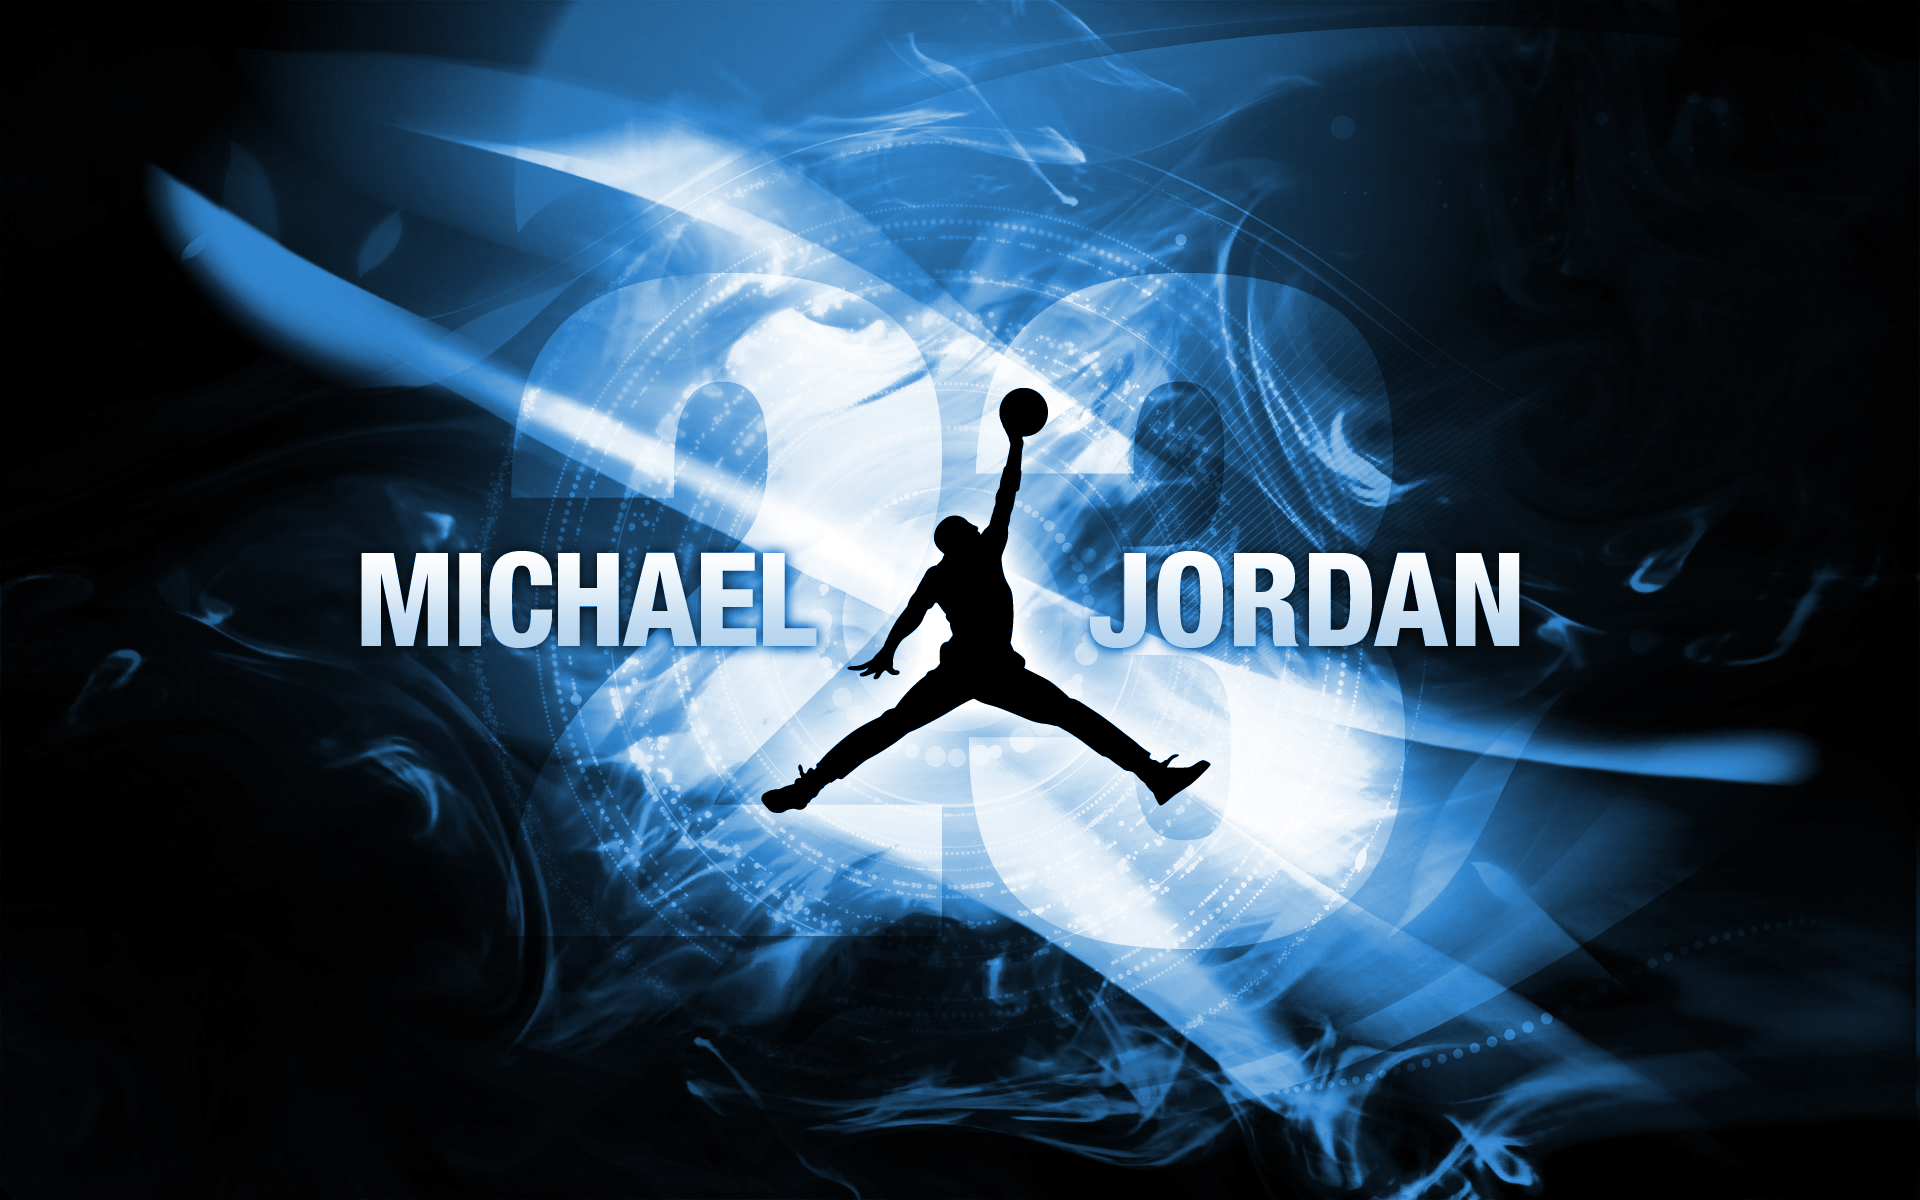 1242x26 Michael Jordan Basketball Logo Iphone Xs Max Wallpaper Hd Sports 4k Wallpapers Images Photos And Background Wallpapers Den